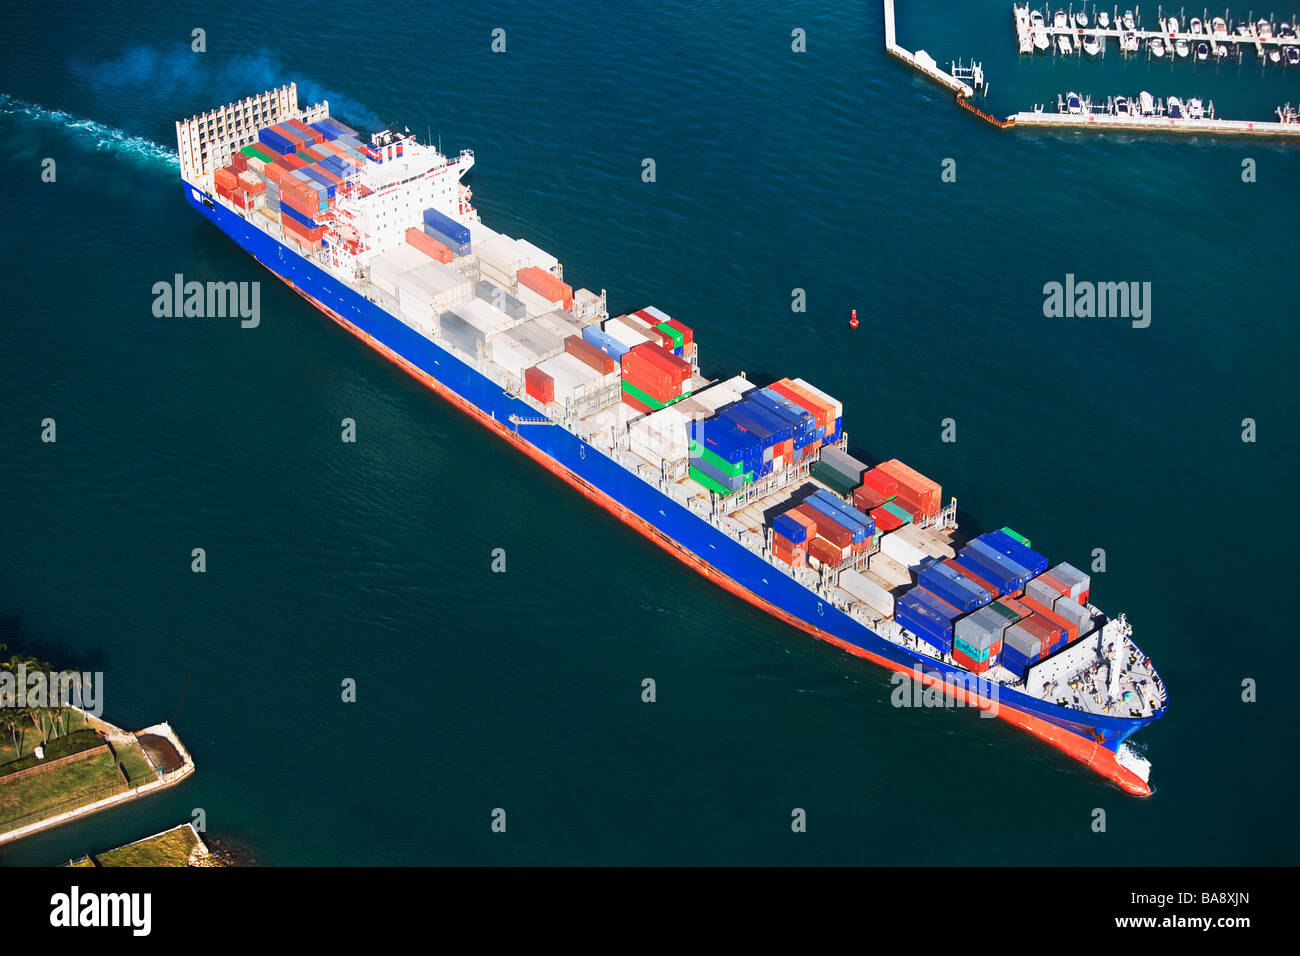 Aerial view of cargo ship Stock Photo